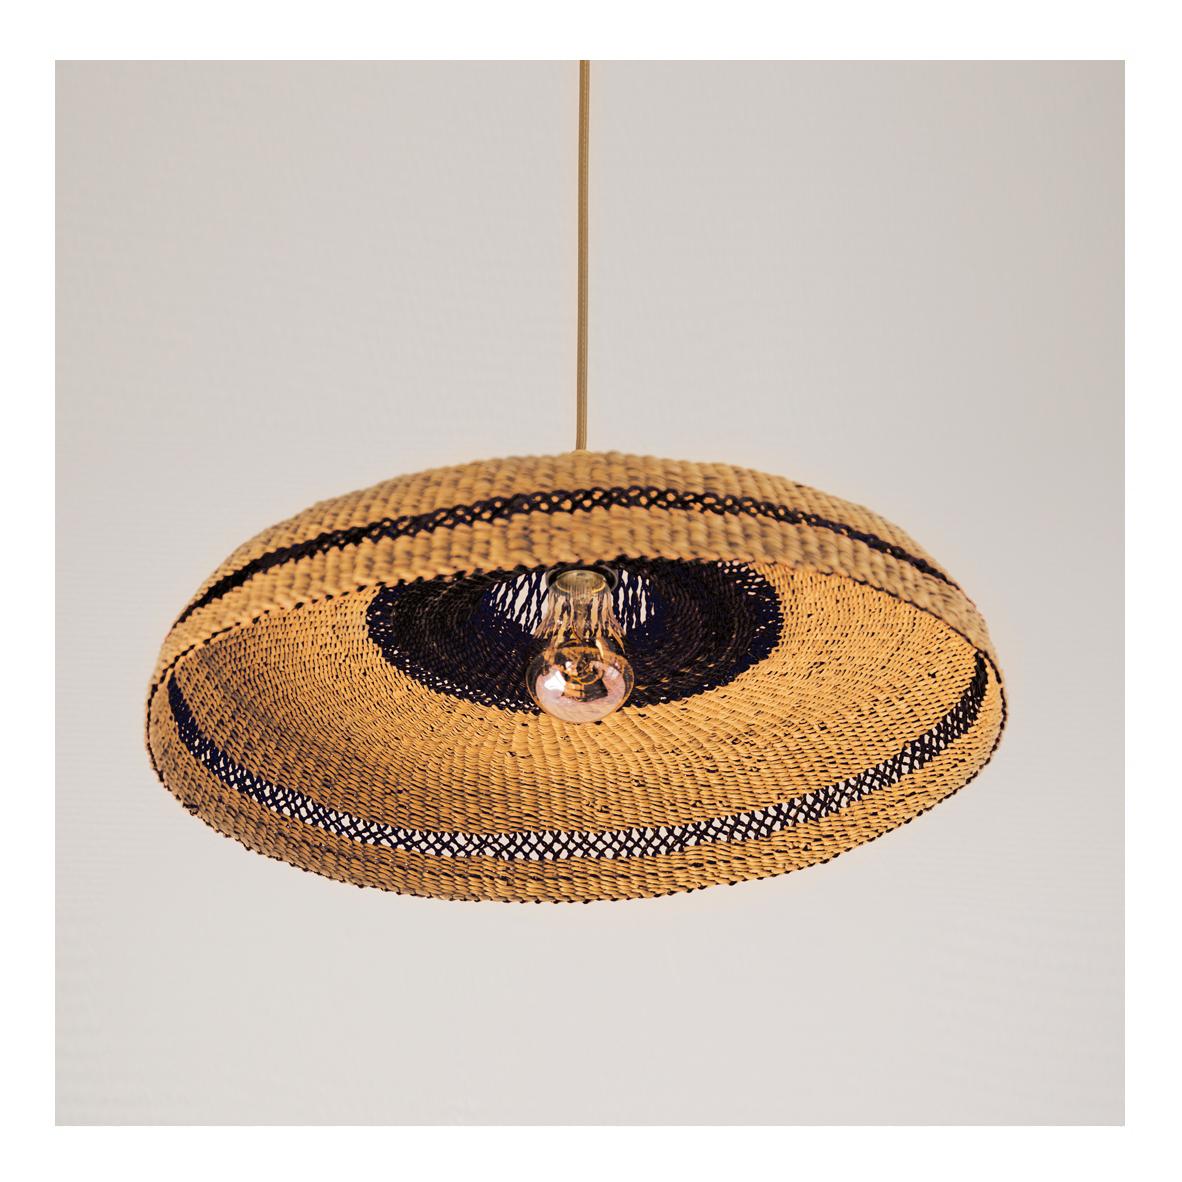 Medium woven pendant lamp Hatter : 
Natural with a little black
Colour: natural and midnight (black)

Are you looking for a really cool natural decoration for your room? We can give you that with this medium pendant lamp that perfectly balances